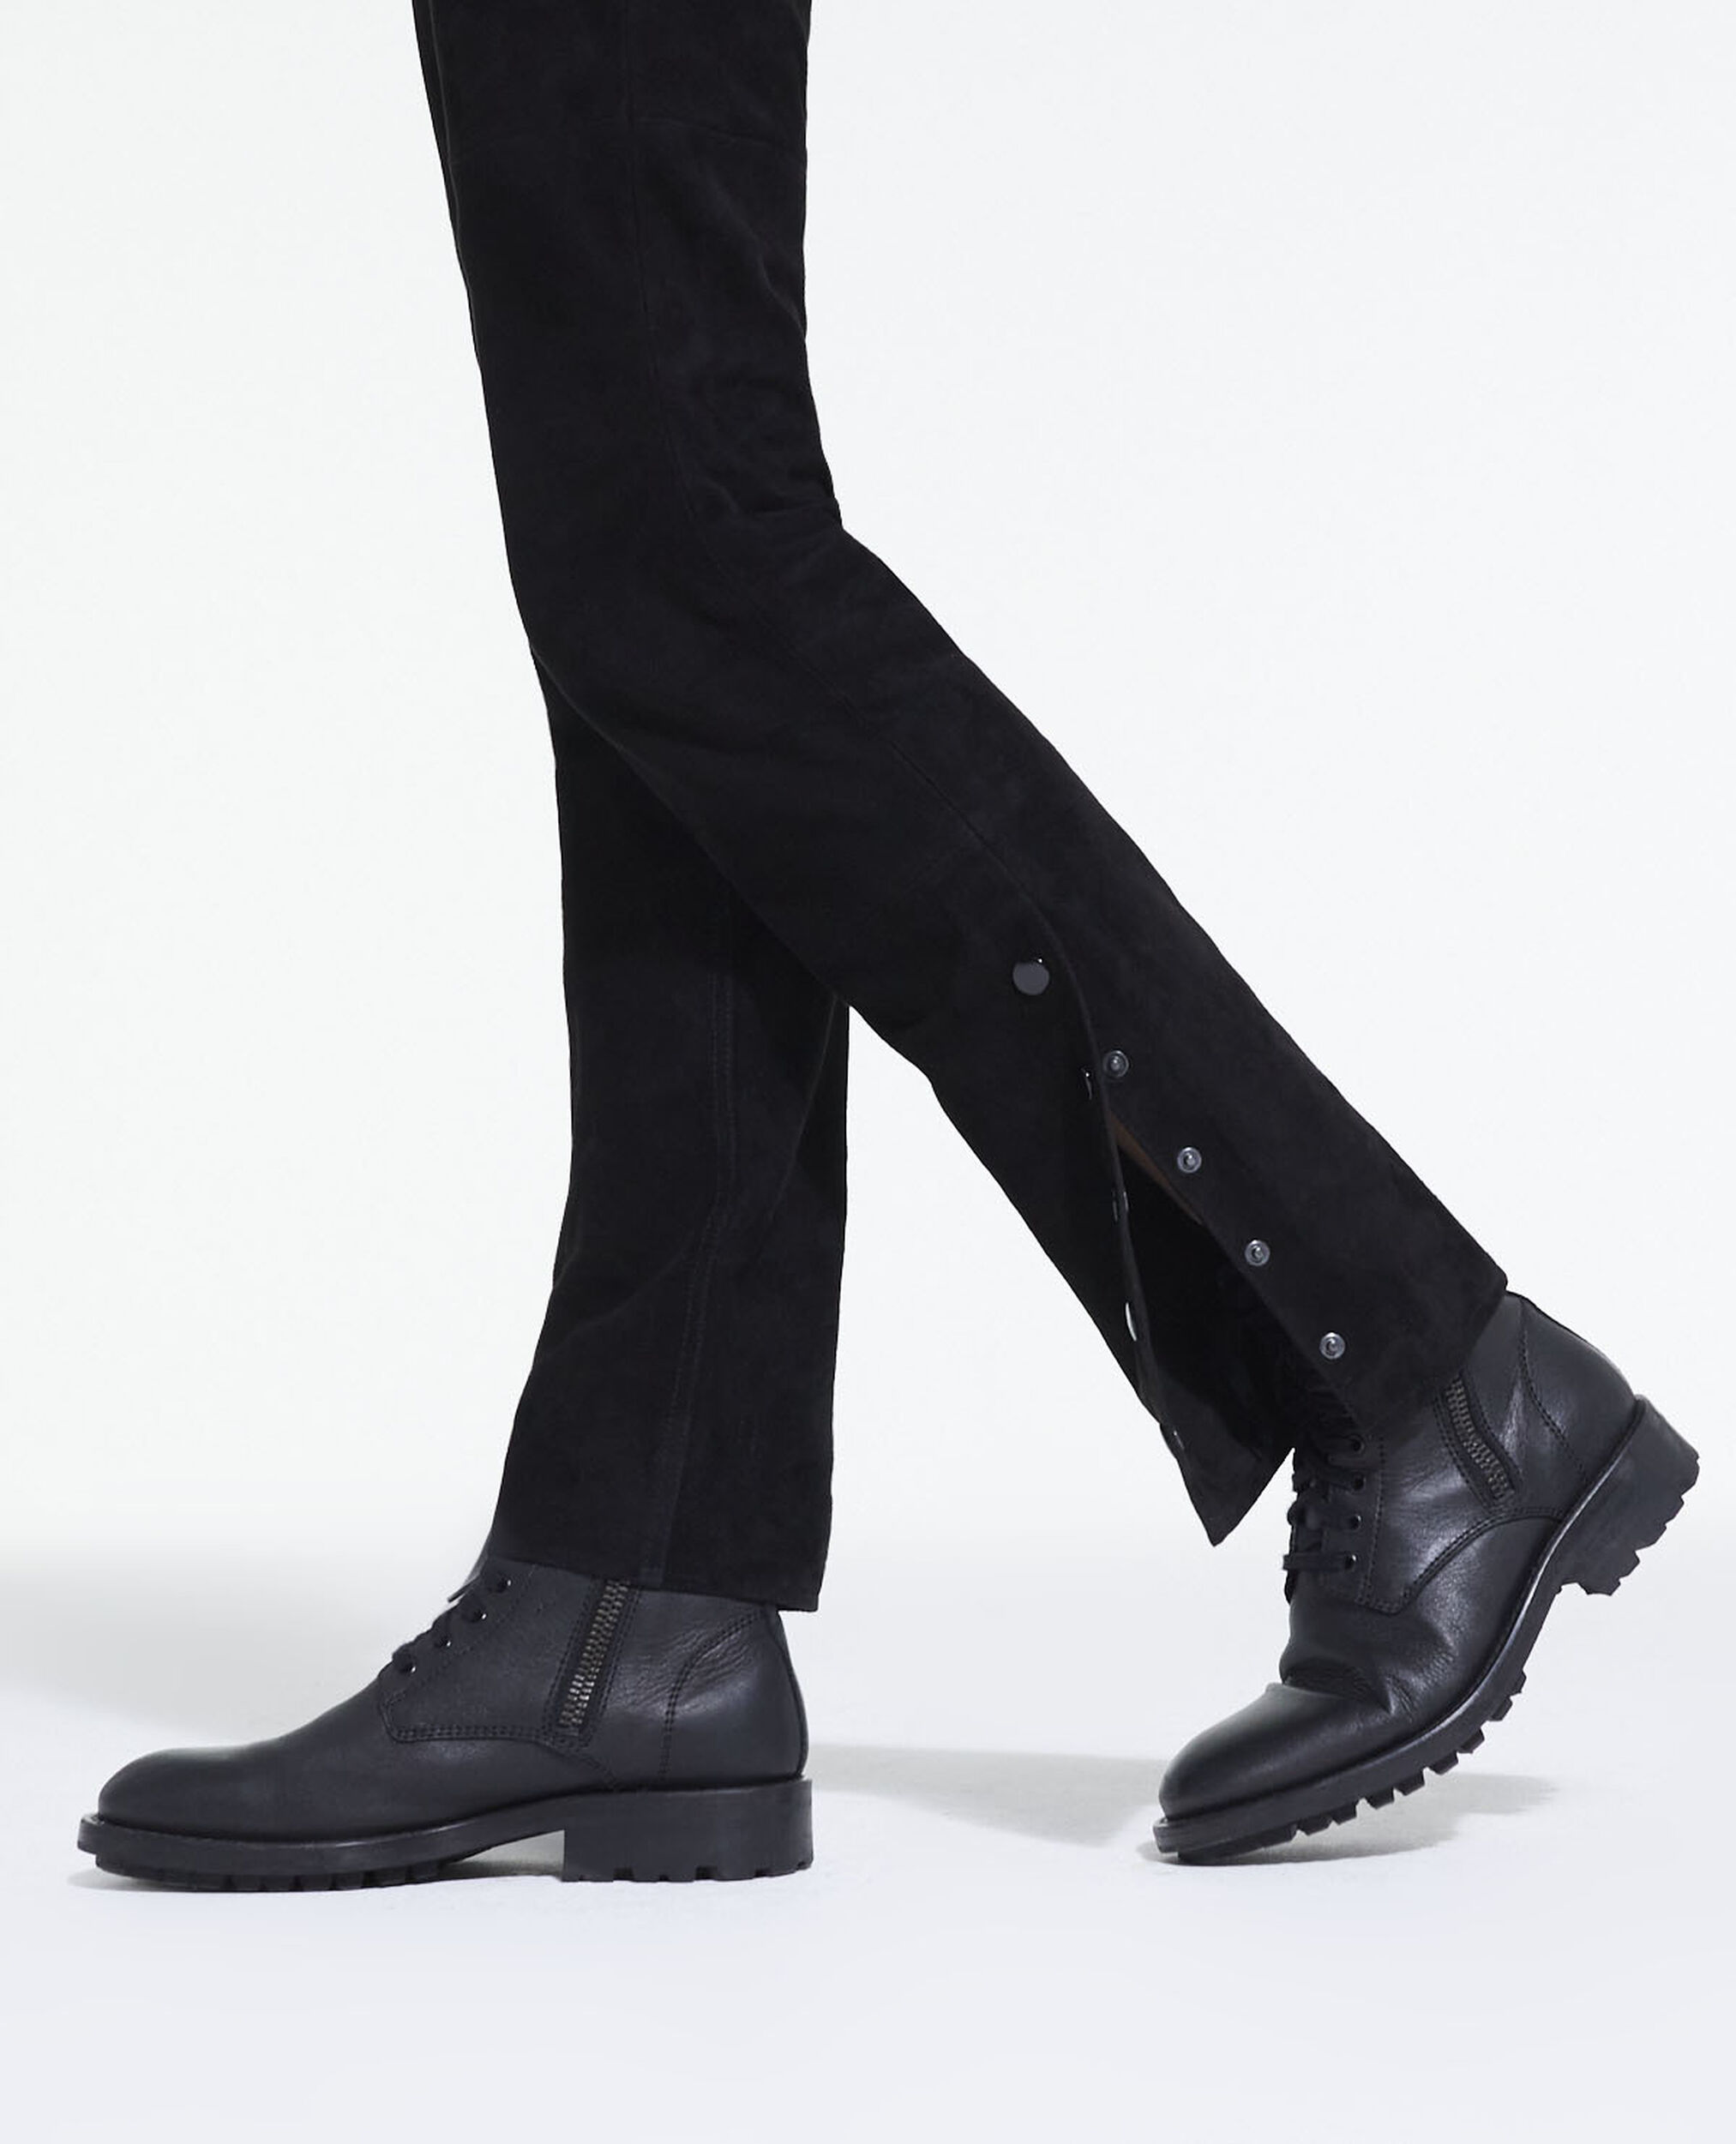 Black suede leather straight-cut pants, BLACK, hi-res image number null